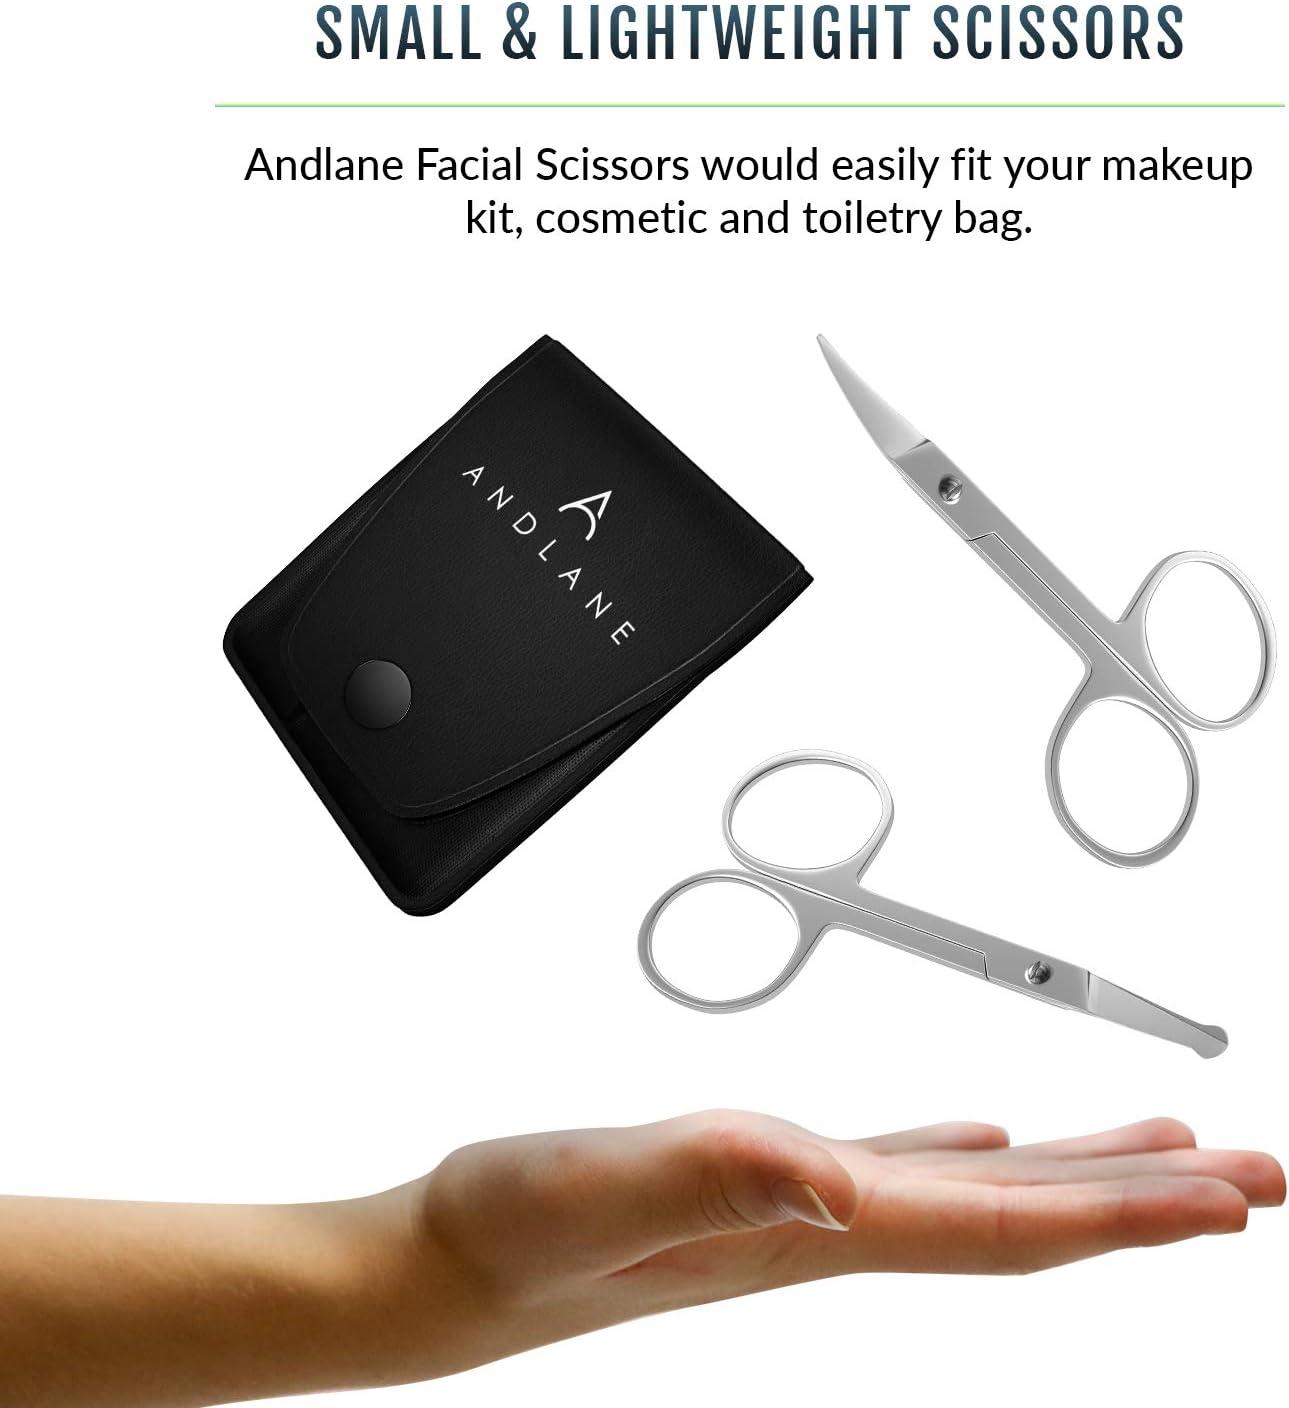 Facial Hair Small Grooming Scissors For Men Women - Eyebrow, Nose Hair,  Mustache, Beard, Eyelashes, Ear Trimming Kit - Curved and Rounded Safety  Tip